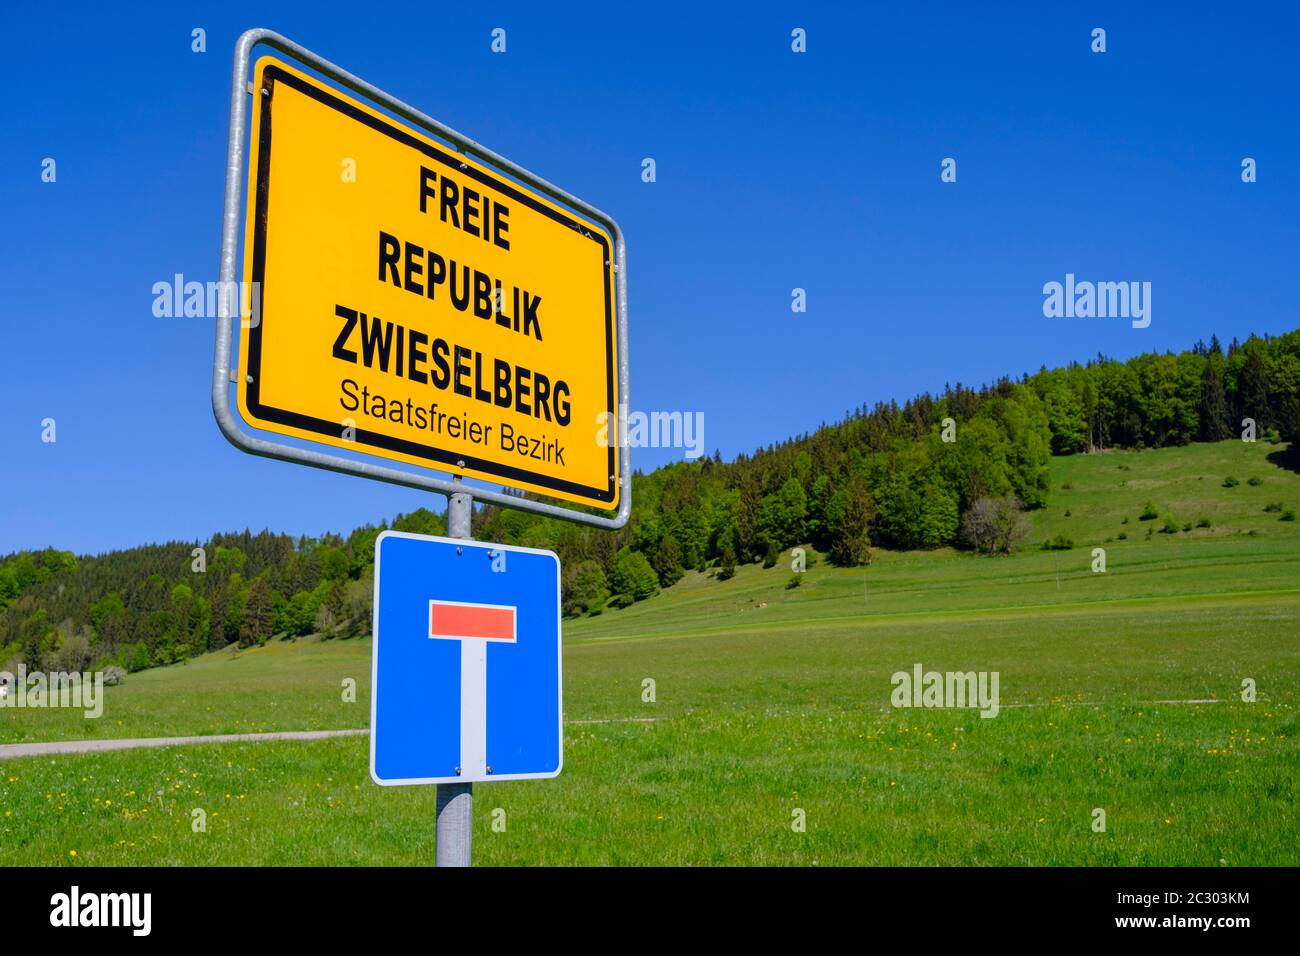 Traffic sign Sackstrasse and place name sign with the inscription Free Republic Zwieselberg state-free district, Zwieselberg, near Rosshaupten Stock Photo